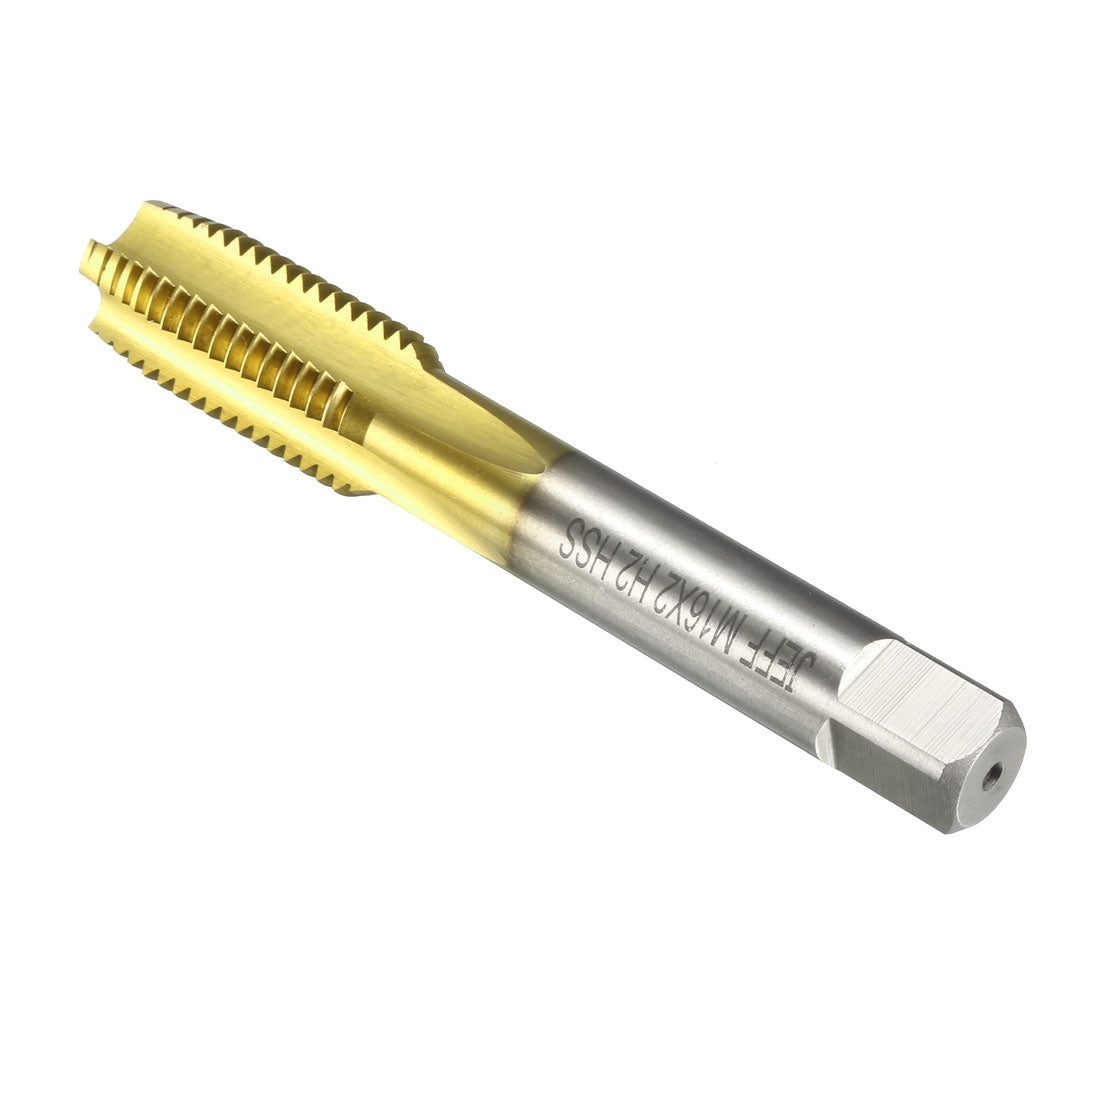 uxcell Uxcell Metric Tap M16 x 2 H2 Right Hand Thread Plug Ti-coated for Threading Tapping